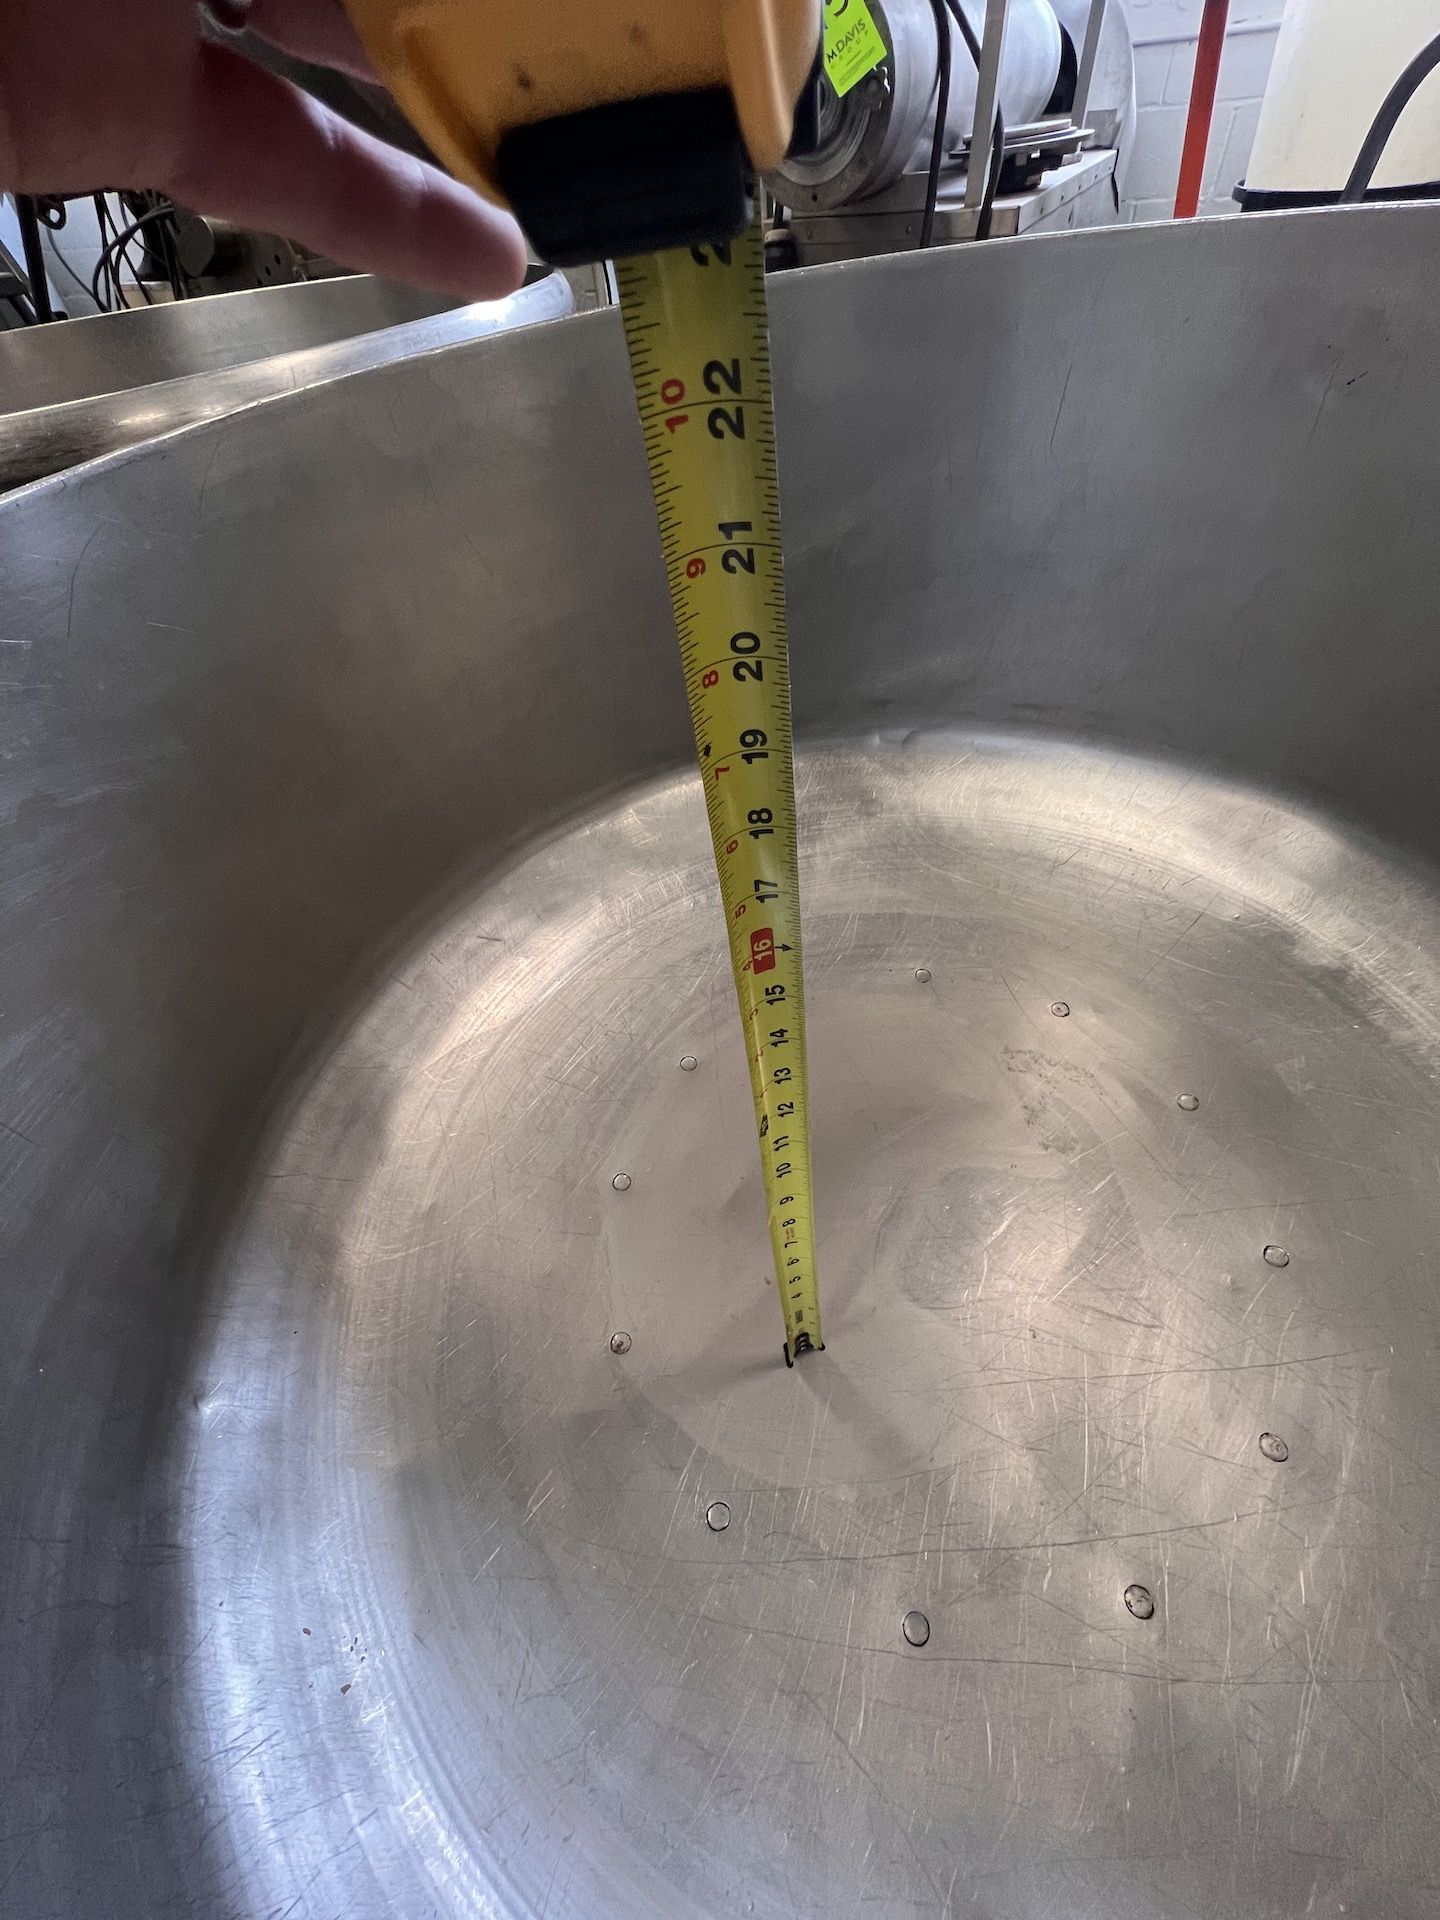 PORTABLE S/S MIXING BOWL FOR SPIRAL MIXERS, APPROX. 38 IN. W X 19 IN. D - Image 3 of 3